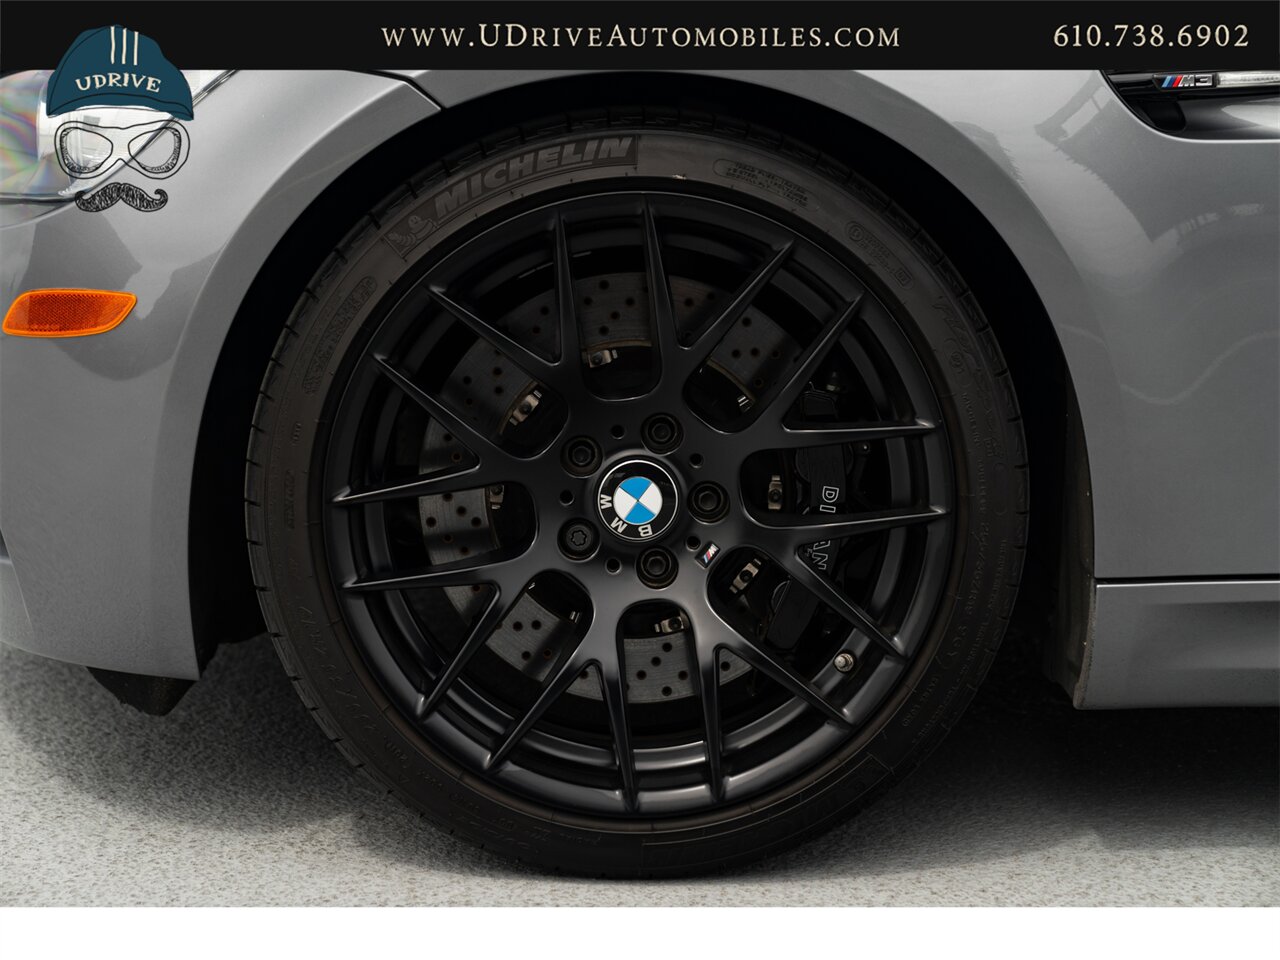 2012 BMW M3 E92 6 Speed 7k Miles Dinan Upgrades  GTS/359 Wheels Carbon Fiber Roof - Photo 55 - West Chester, PA 19382